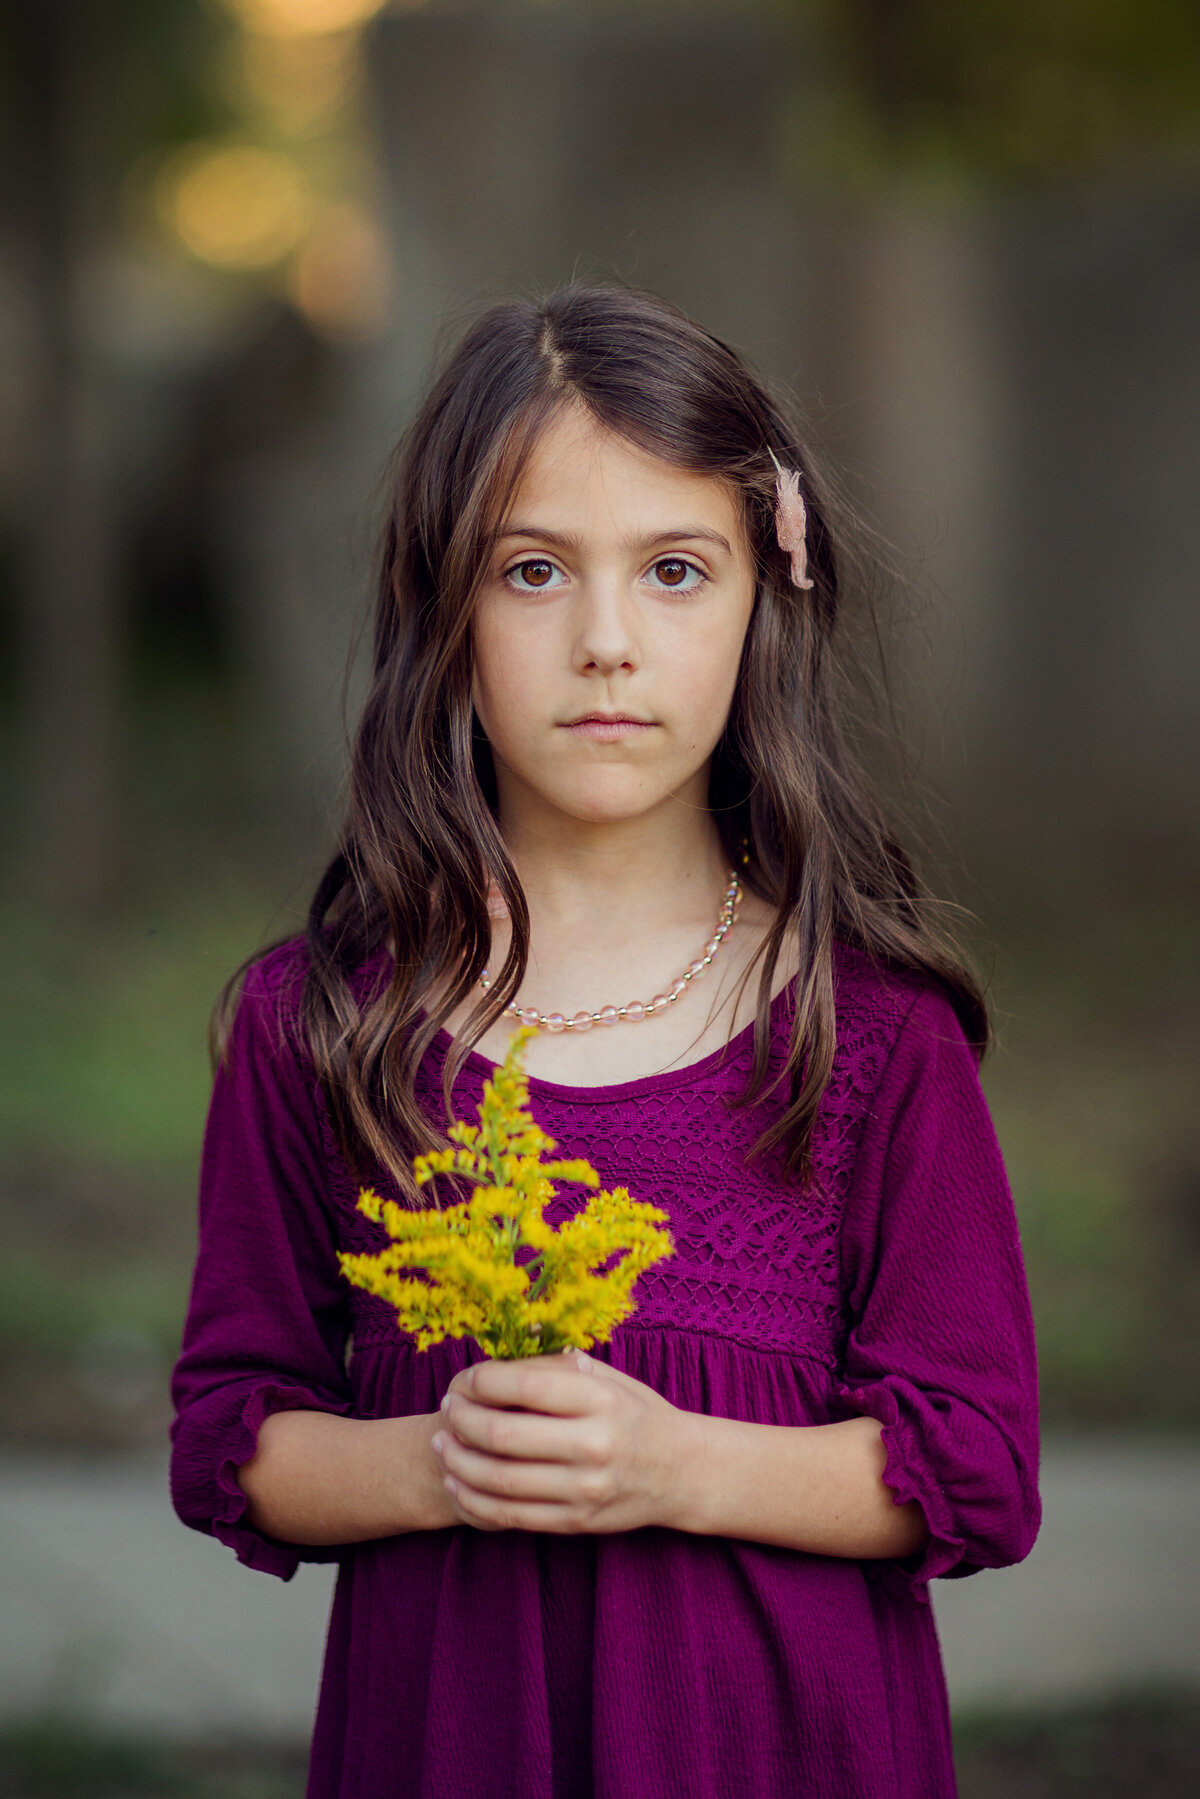 A young girl in a pink dress is looking at the camera, holding yellow flowers.